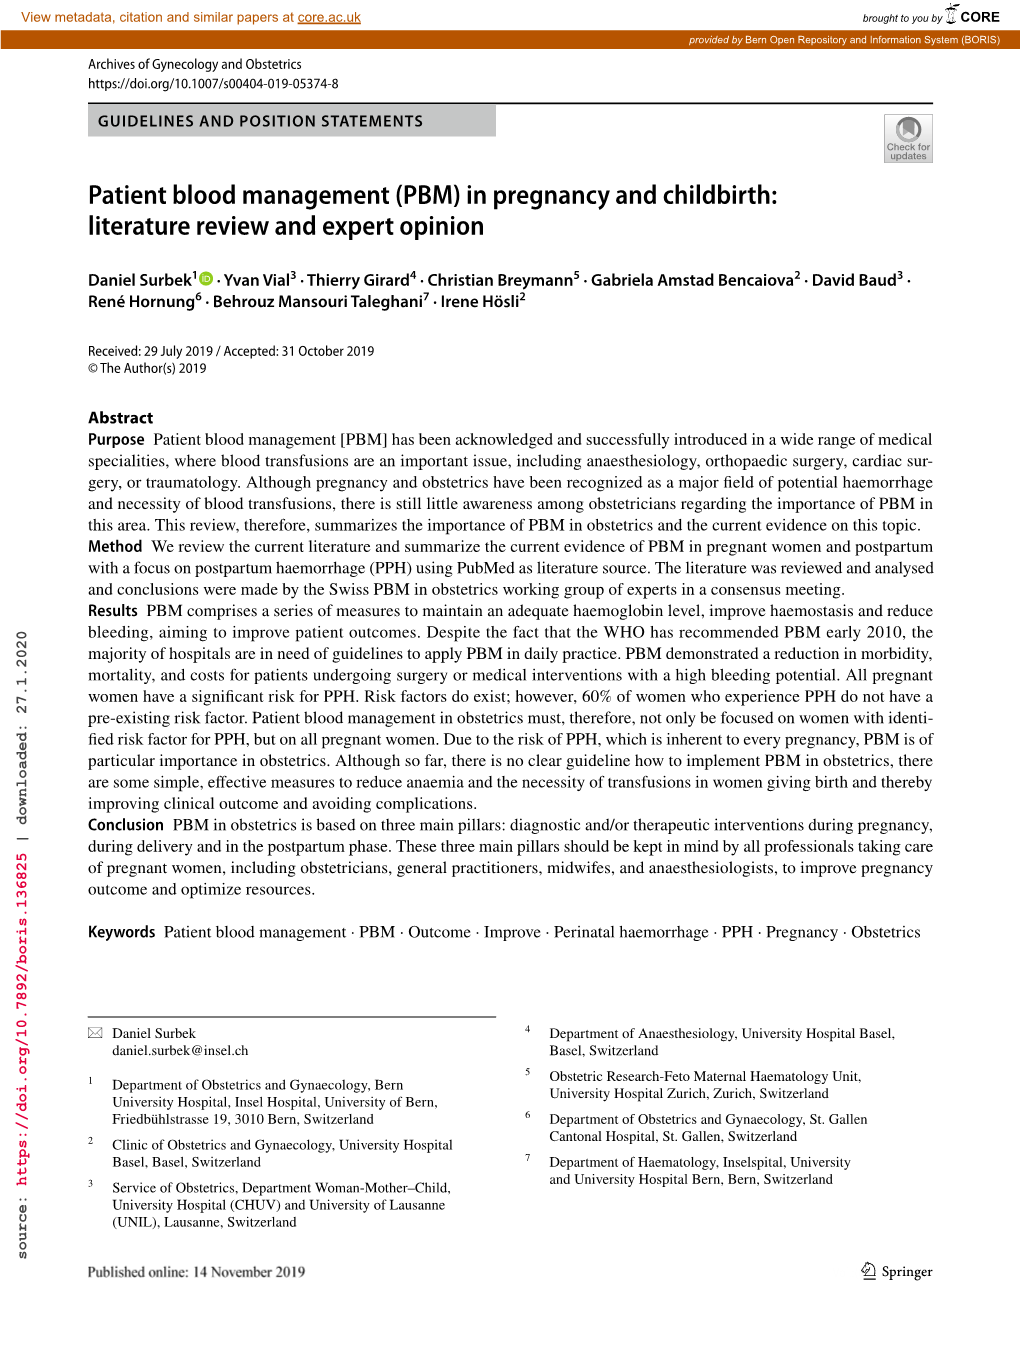 PBM) in Pregnancy and Childbirth: Literature Review and Expert Opinion